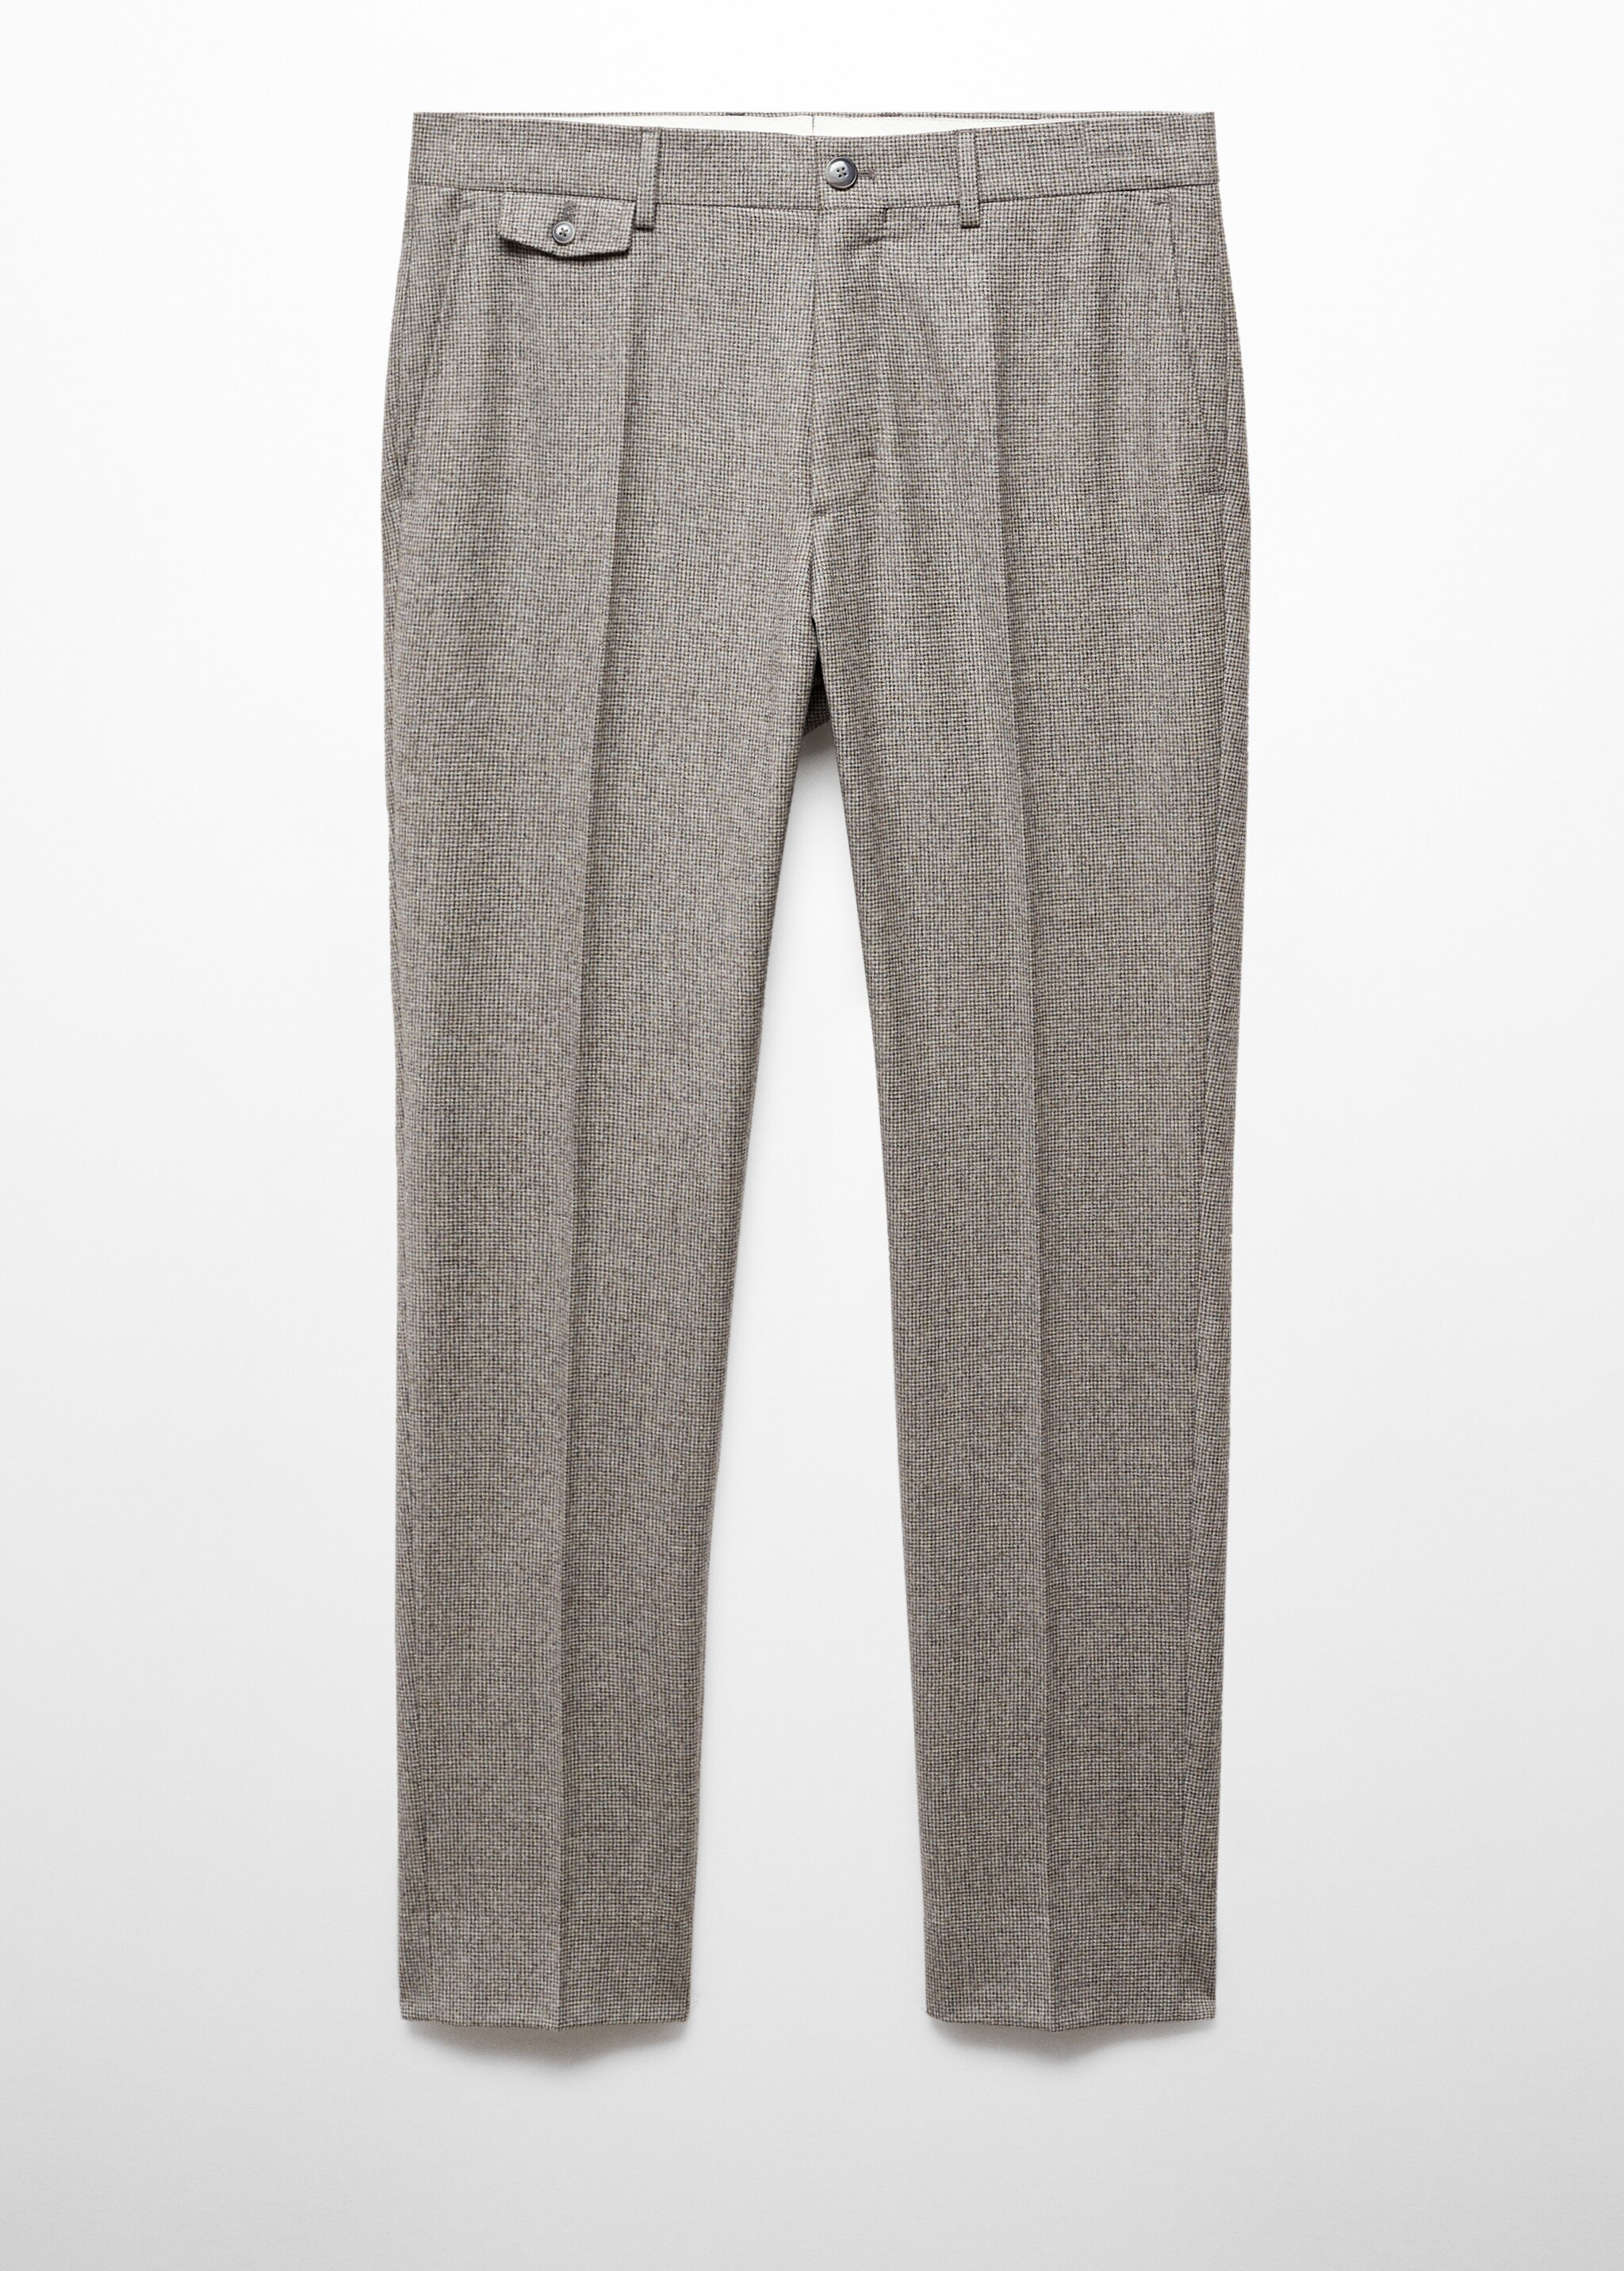 100% virgin wool micro-houndstooth trousers - Article without model